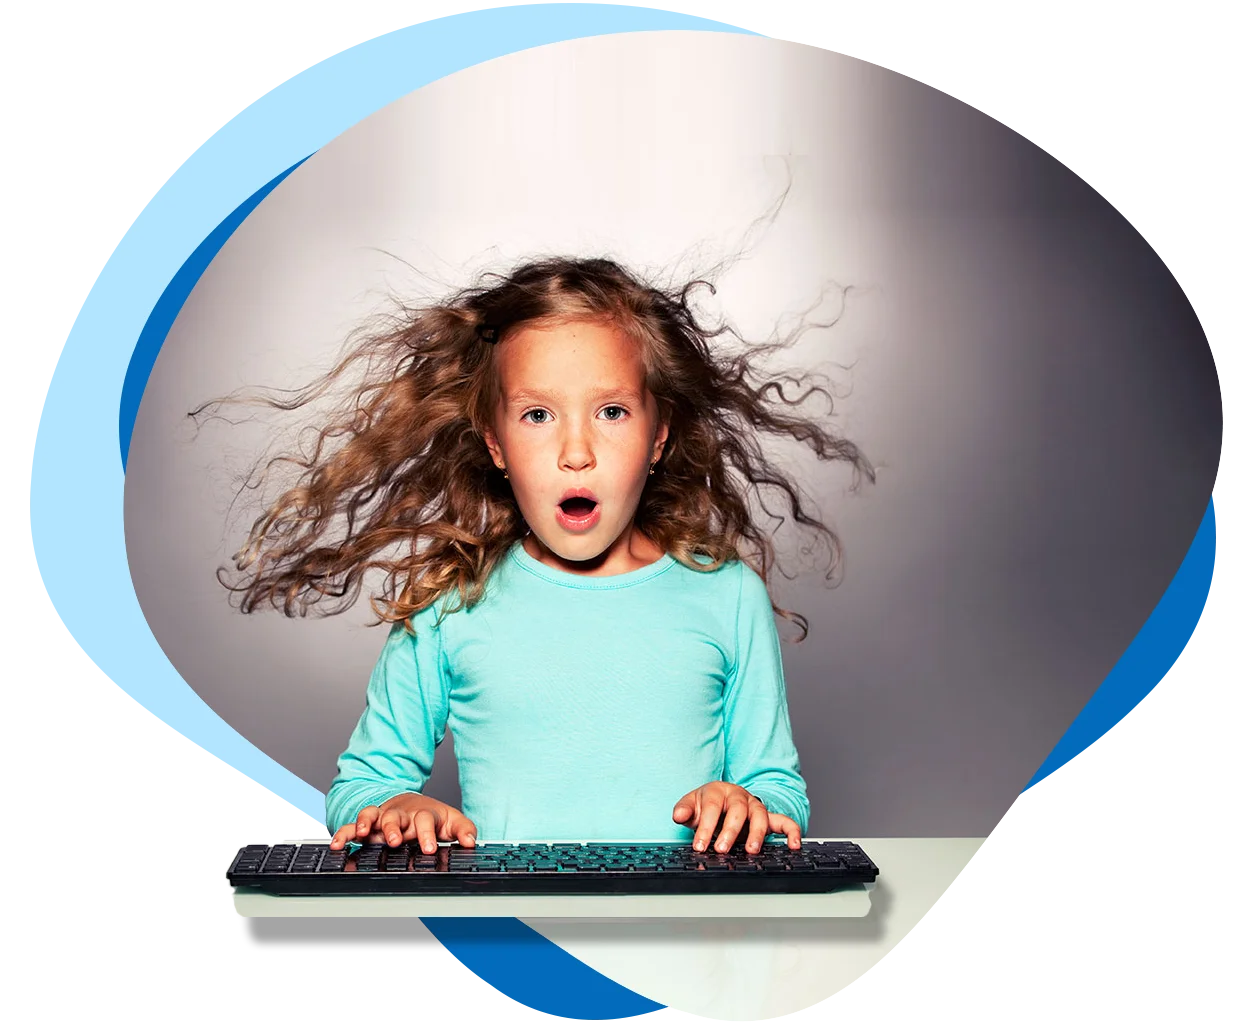 Excited young girl typing on keyboard while using KC Returns app